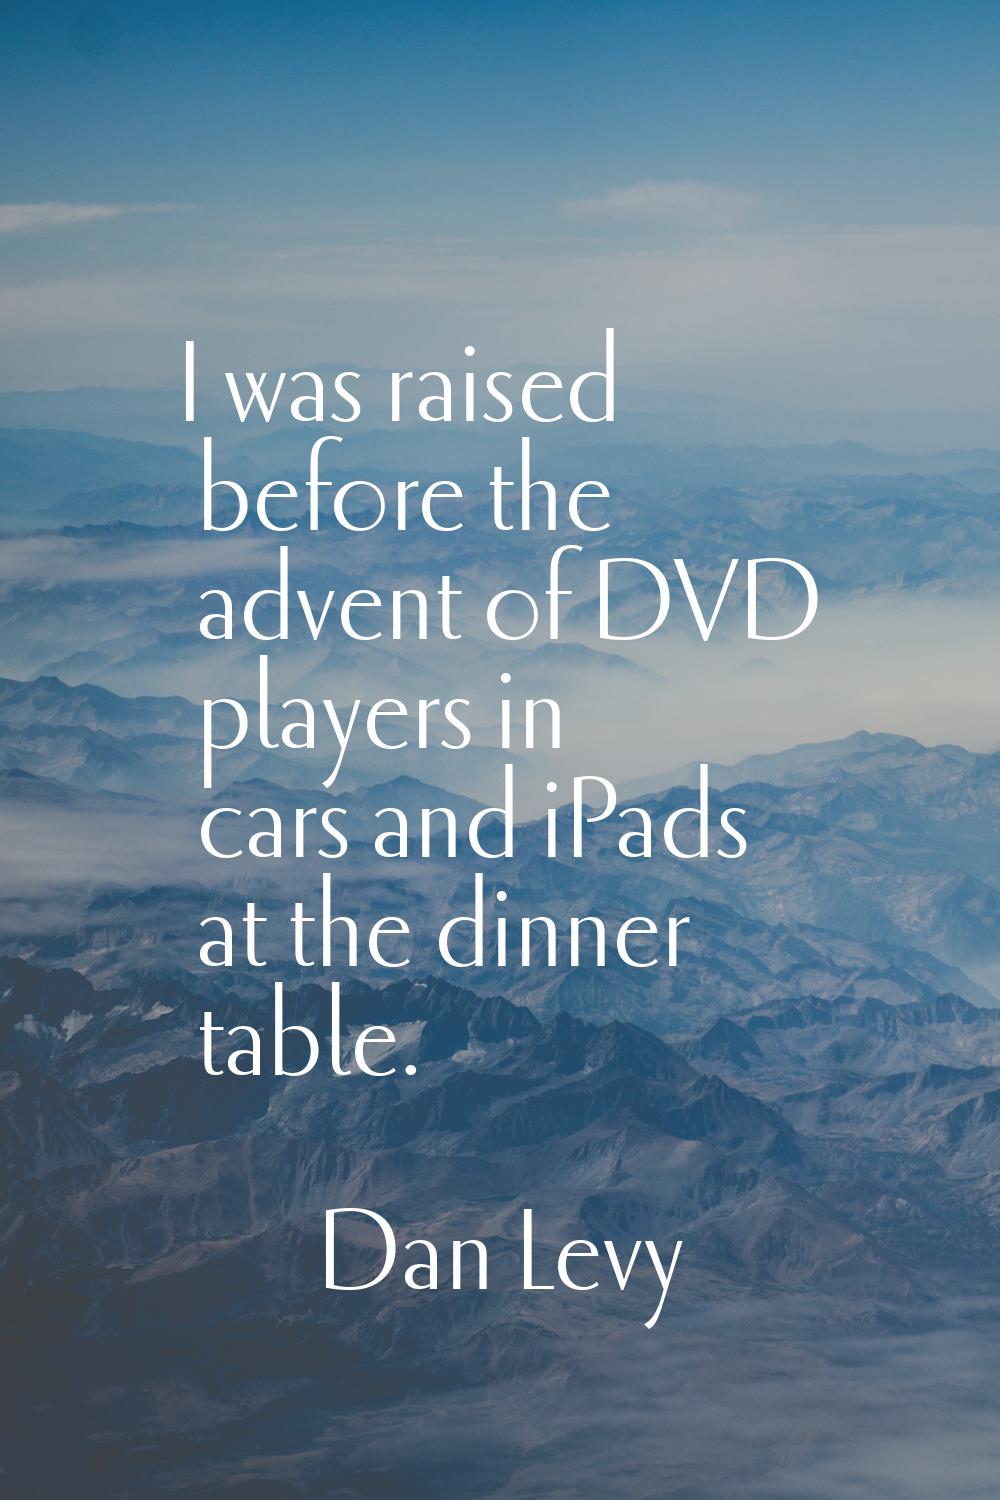 I was raised before the advent of DVD players in cars and iPads at the dinner table.